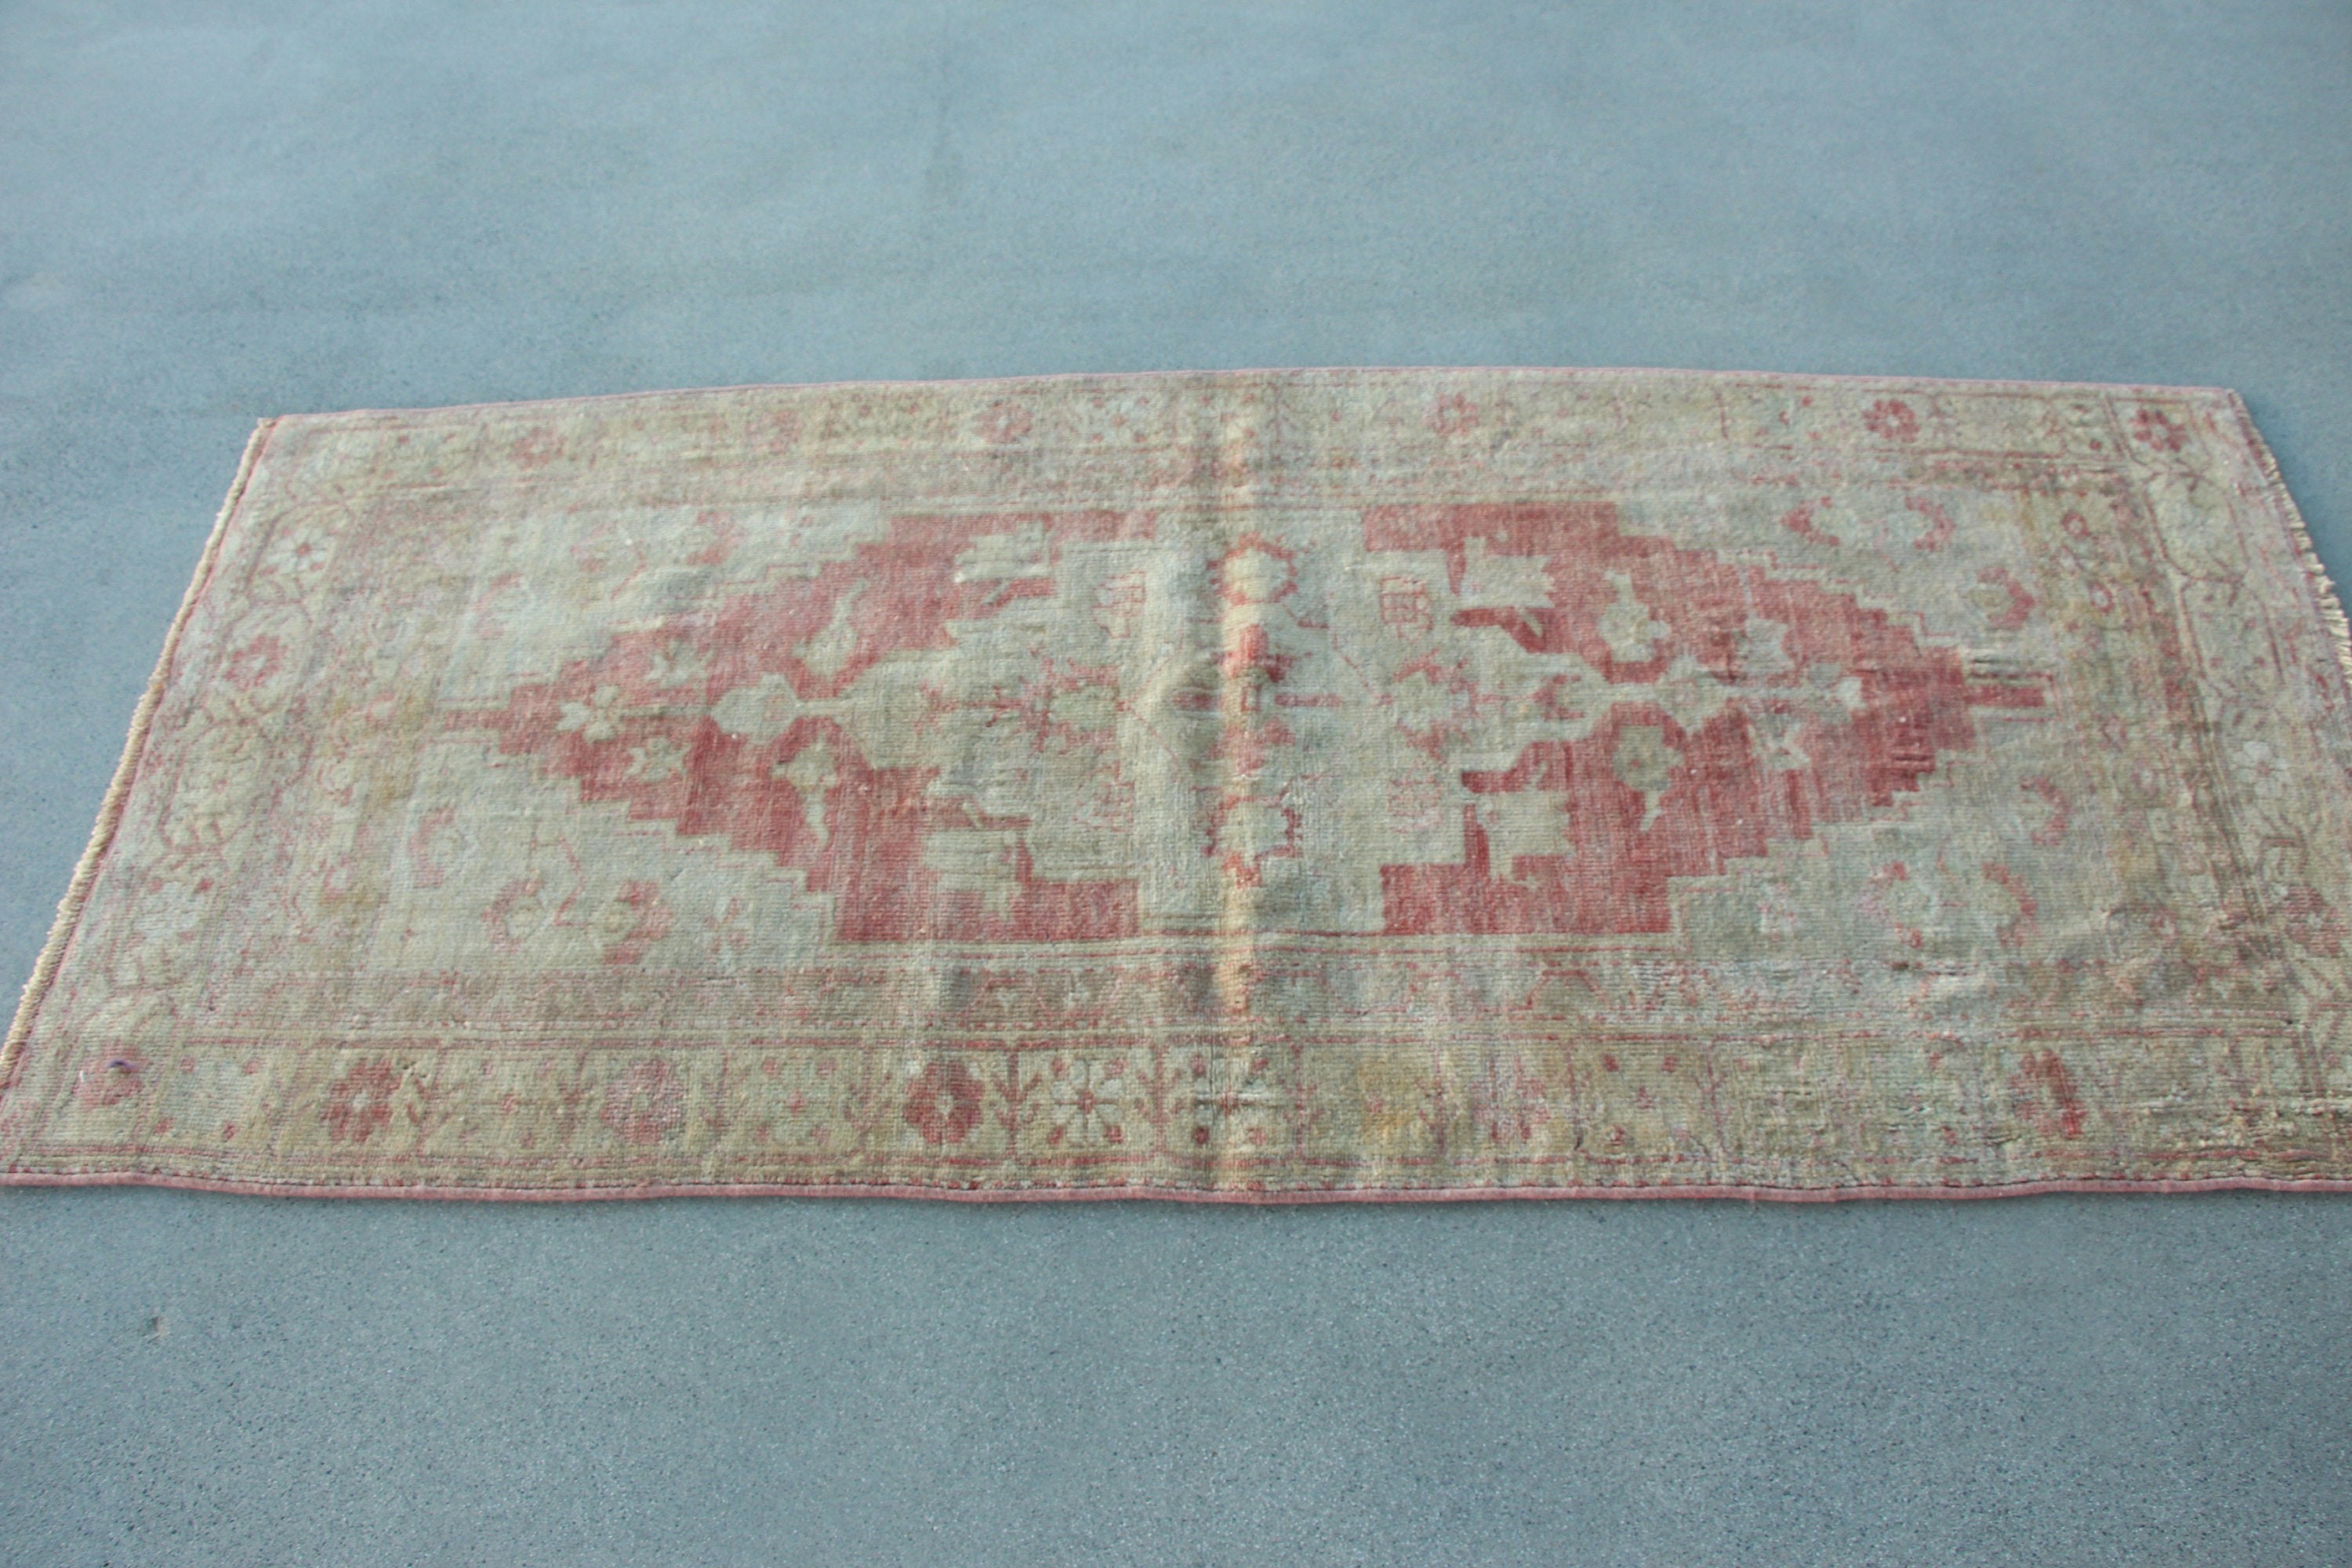 Rugs for Entry, Bedroom Rugs, Pink Wool Rugs, Turkish Rug, Cool Rugs, Vintage Decor Rug, 2.8x6.4 ft Accent Rug, Entry Rugs, Vintage Rug